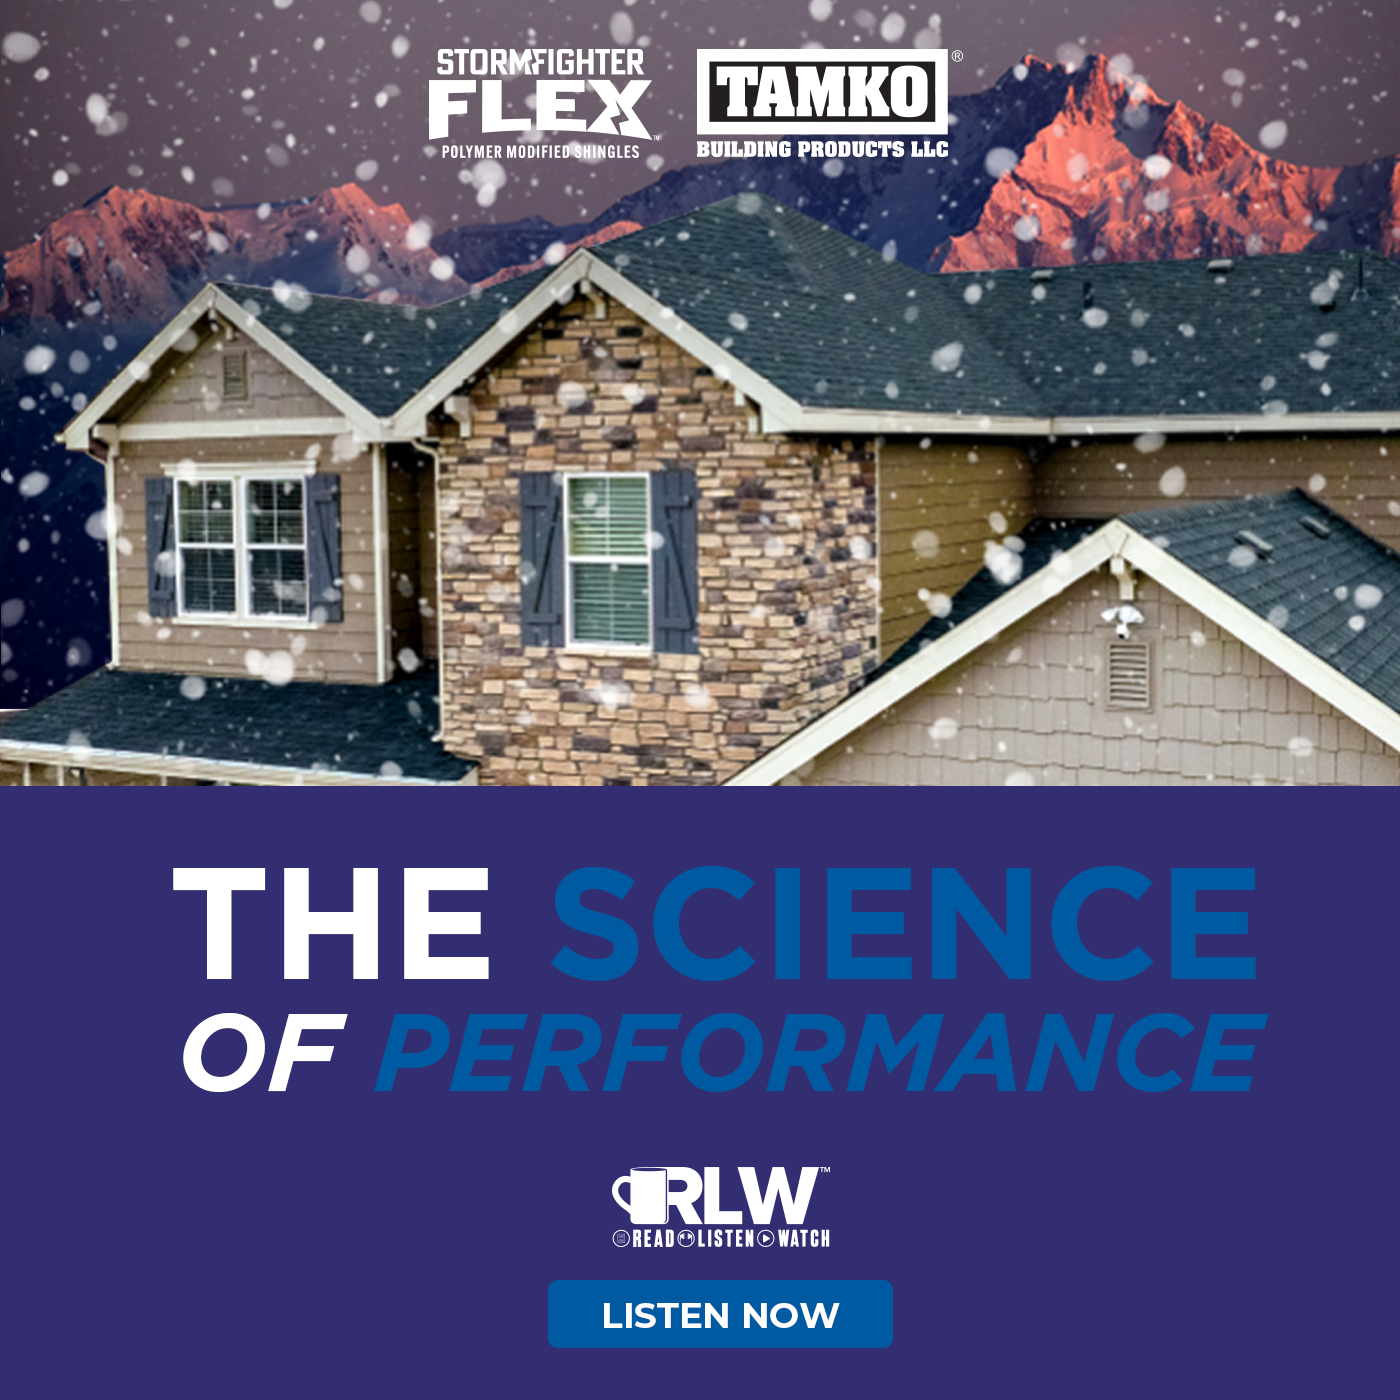 TAMKO - The Science of Performance (RLW Podcast)